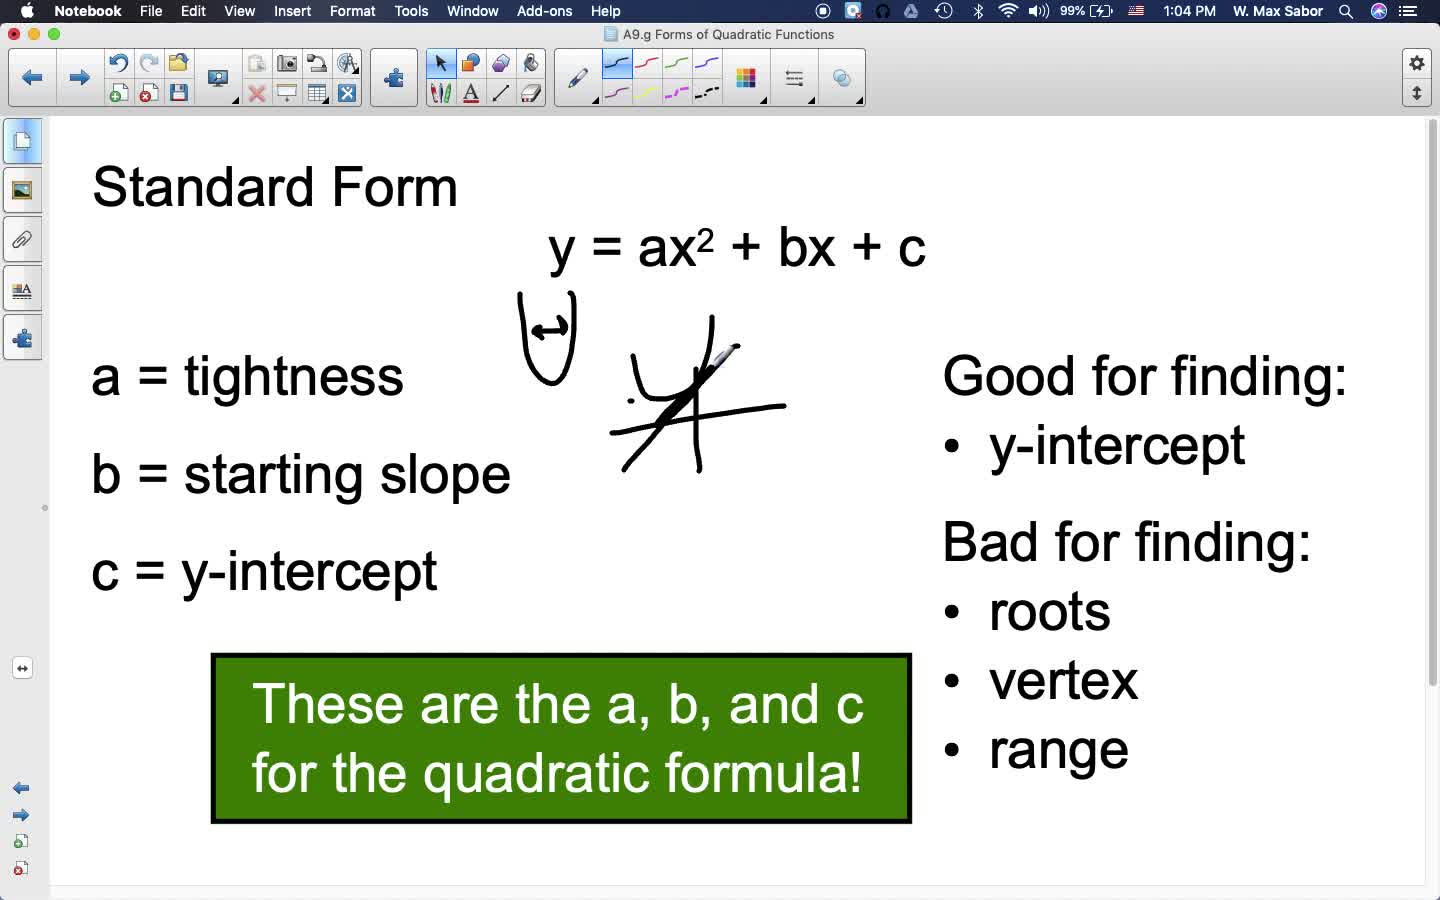 A9.g Forms of Quadratic Functions